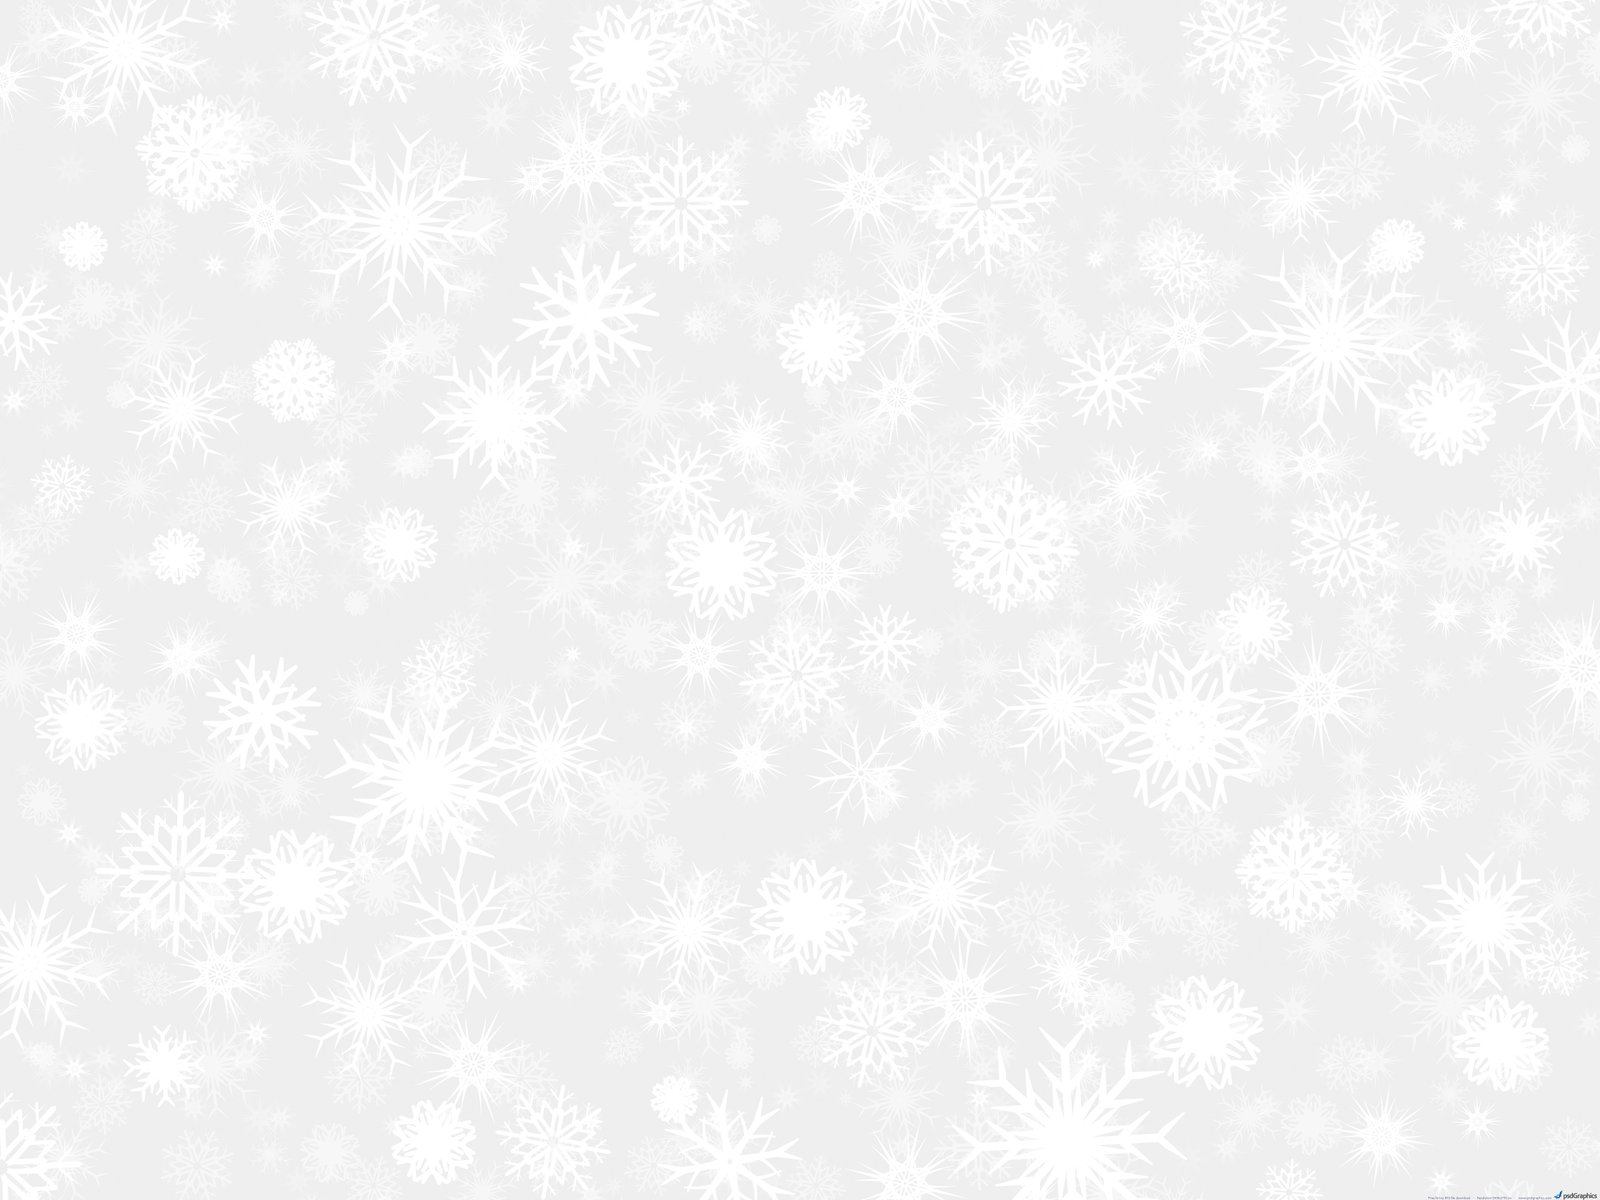 Snow Falling with White Background Texture